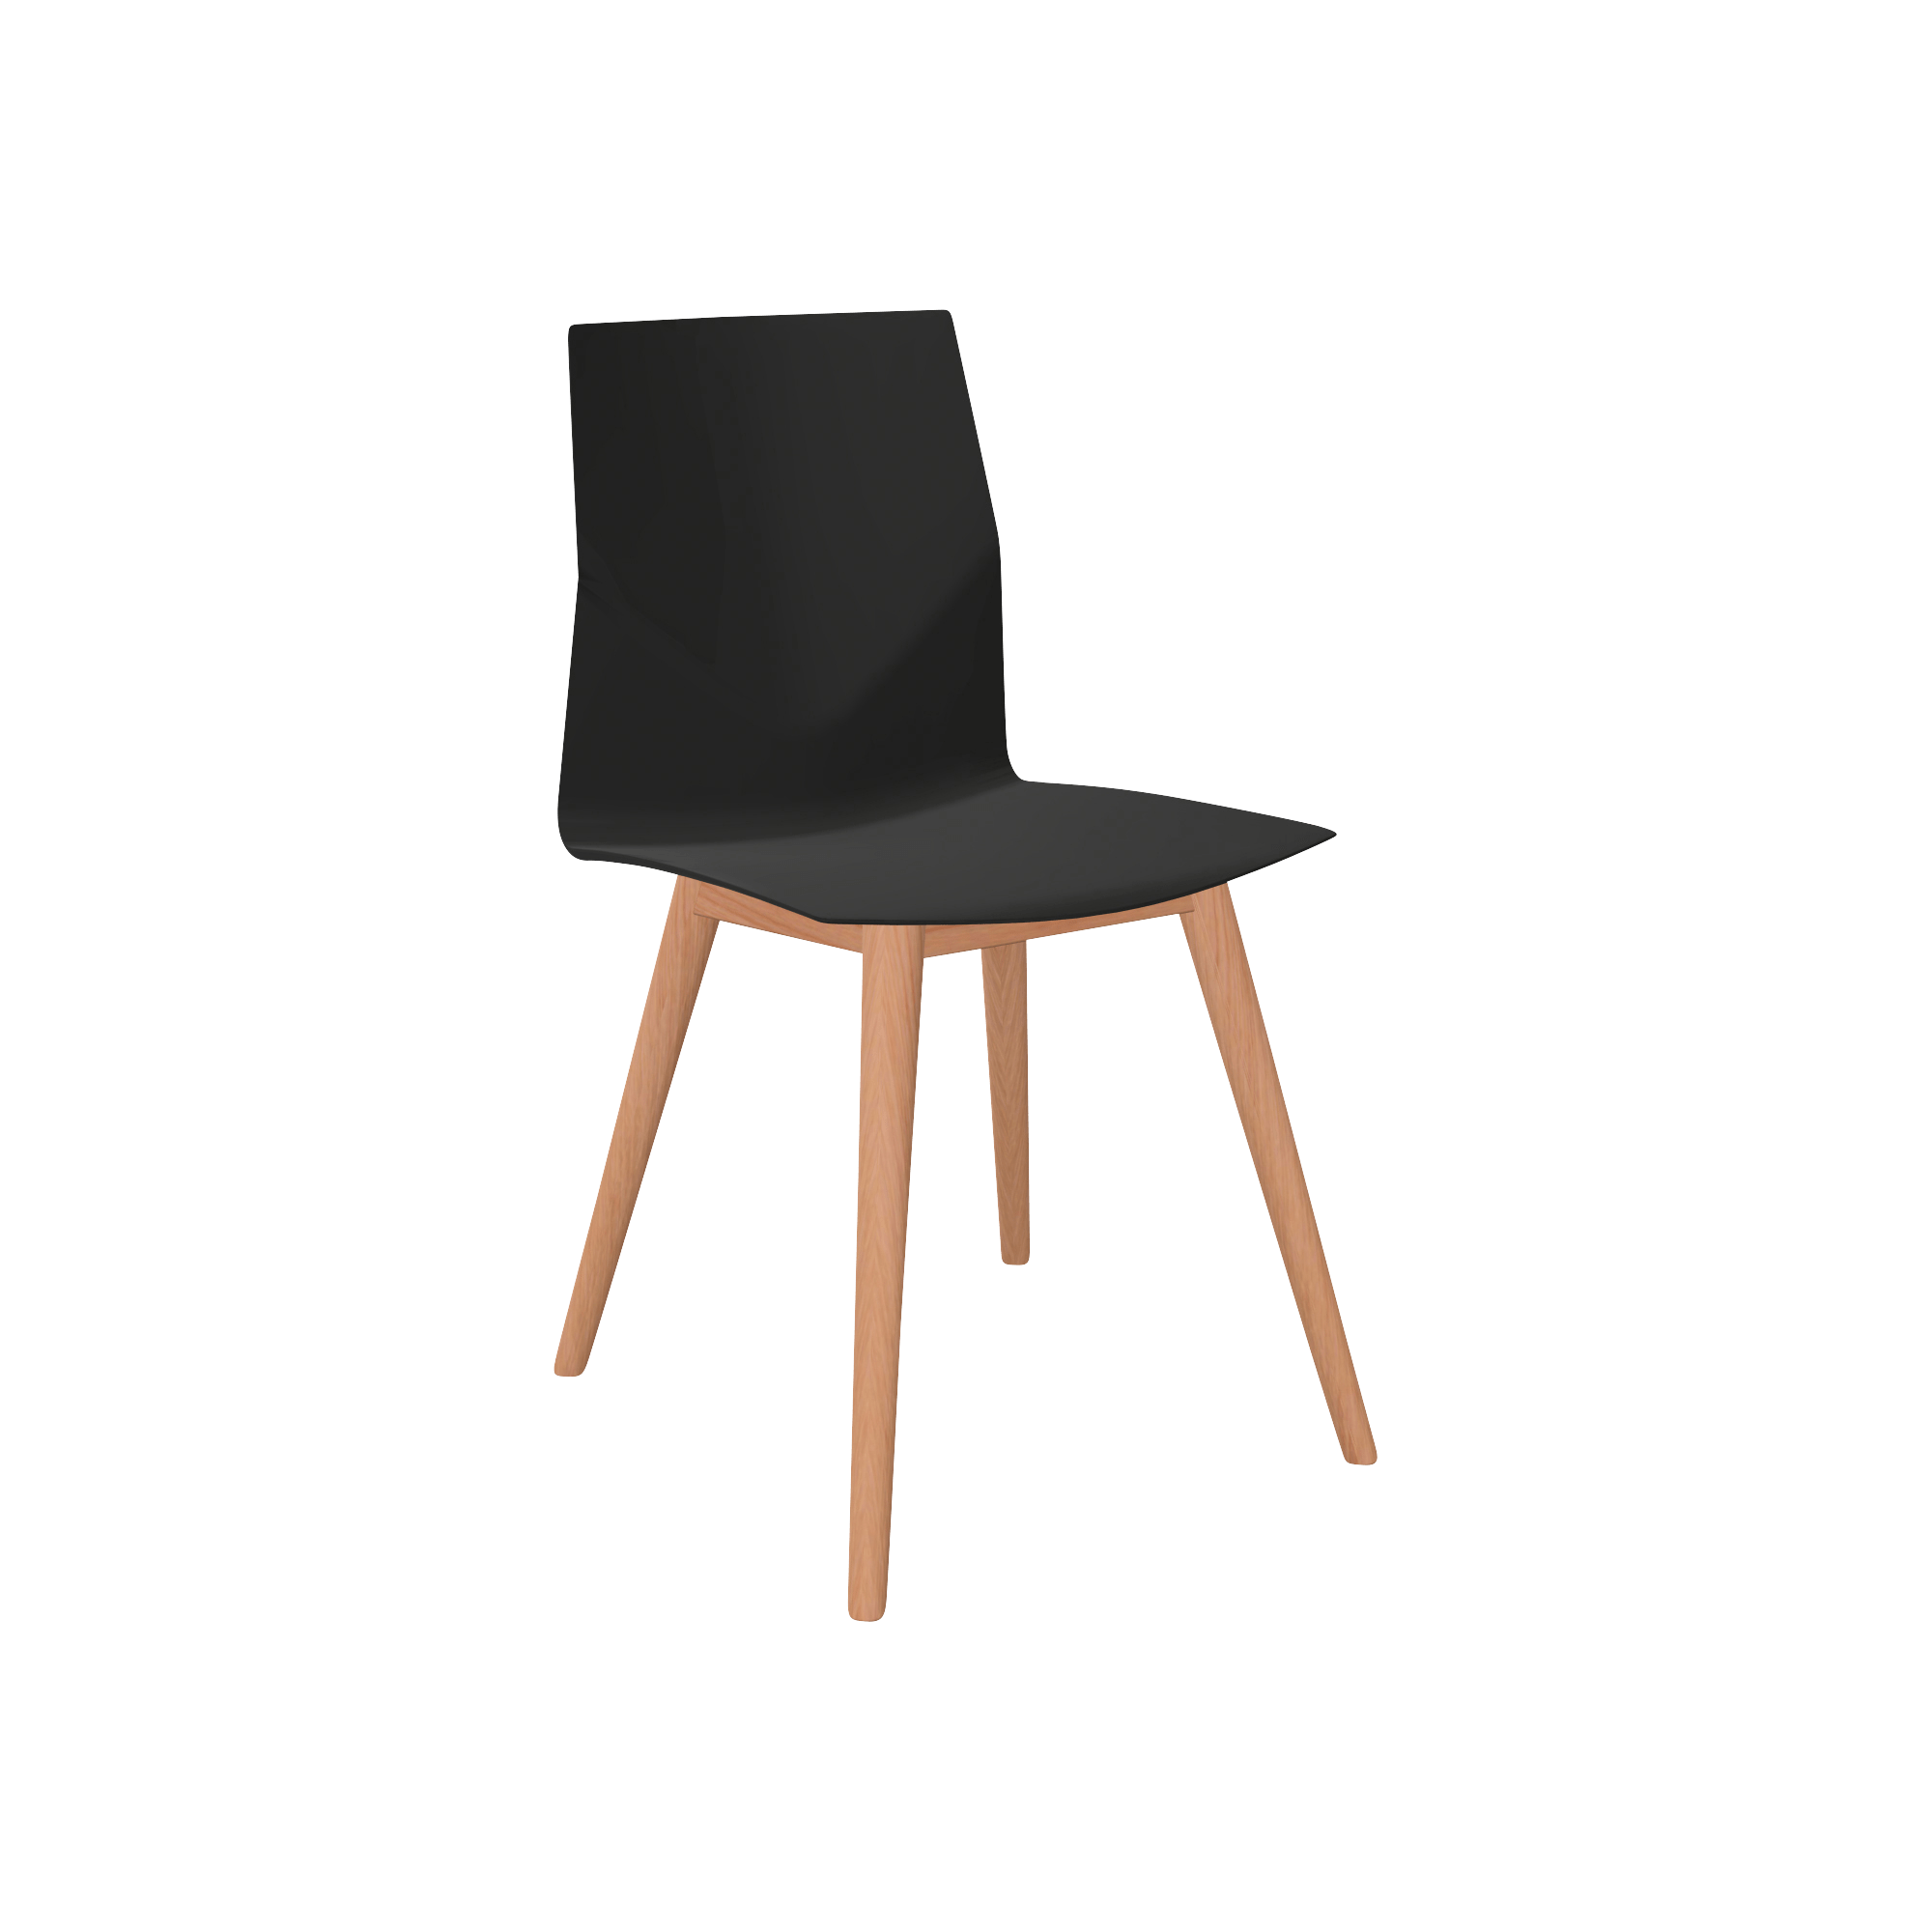 black designer office chair with wooden legs